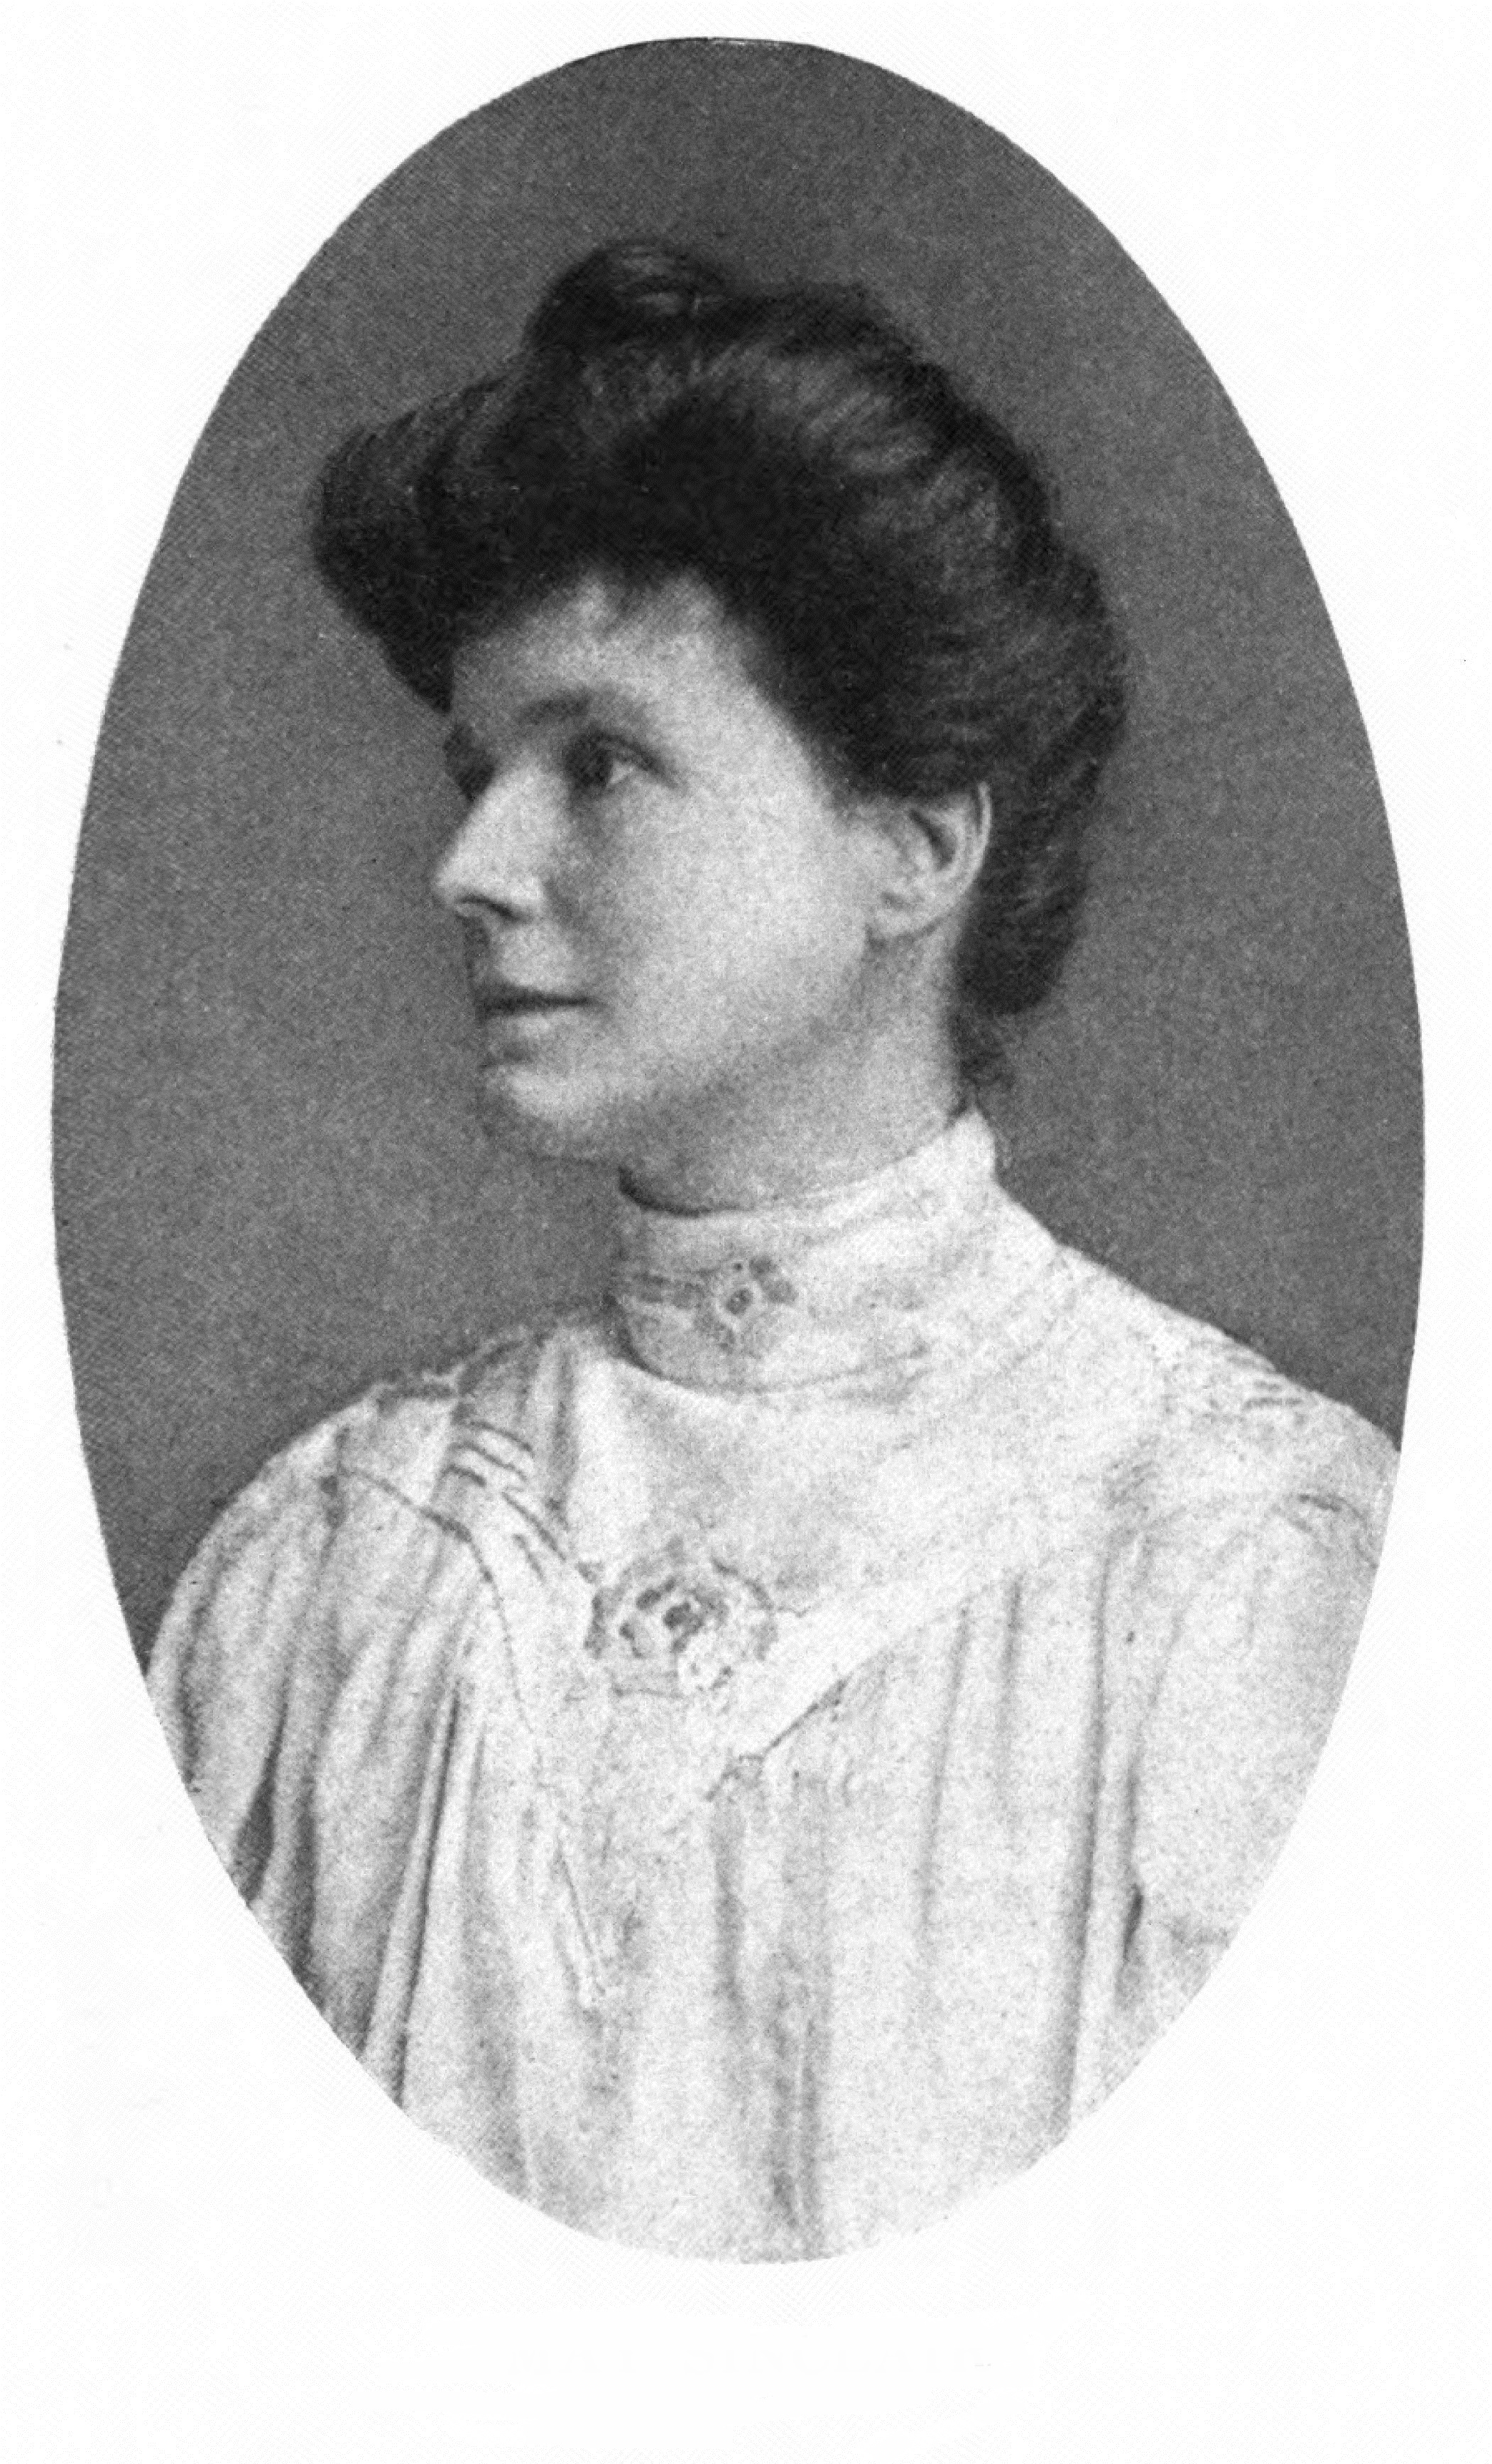 A portrait of May Sinclair